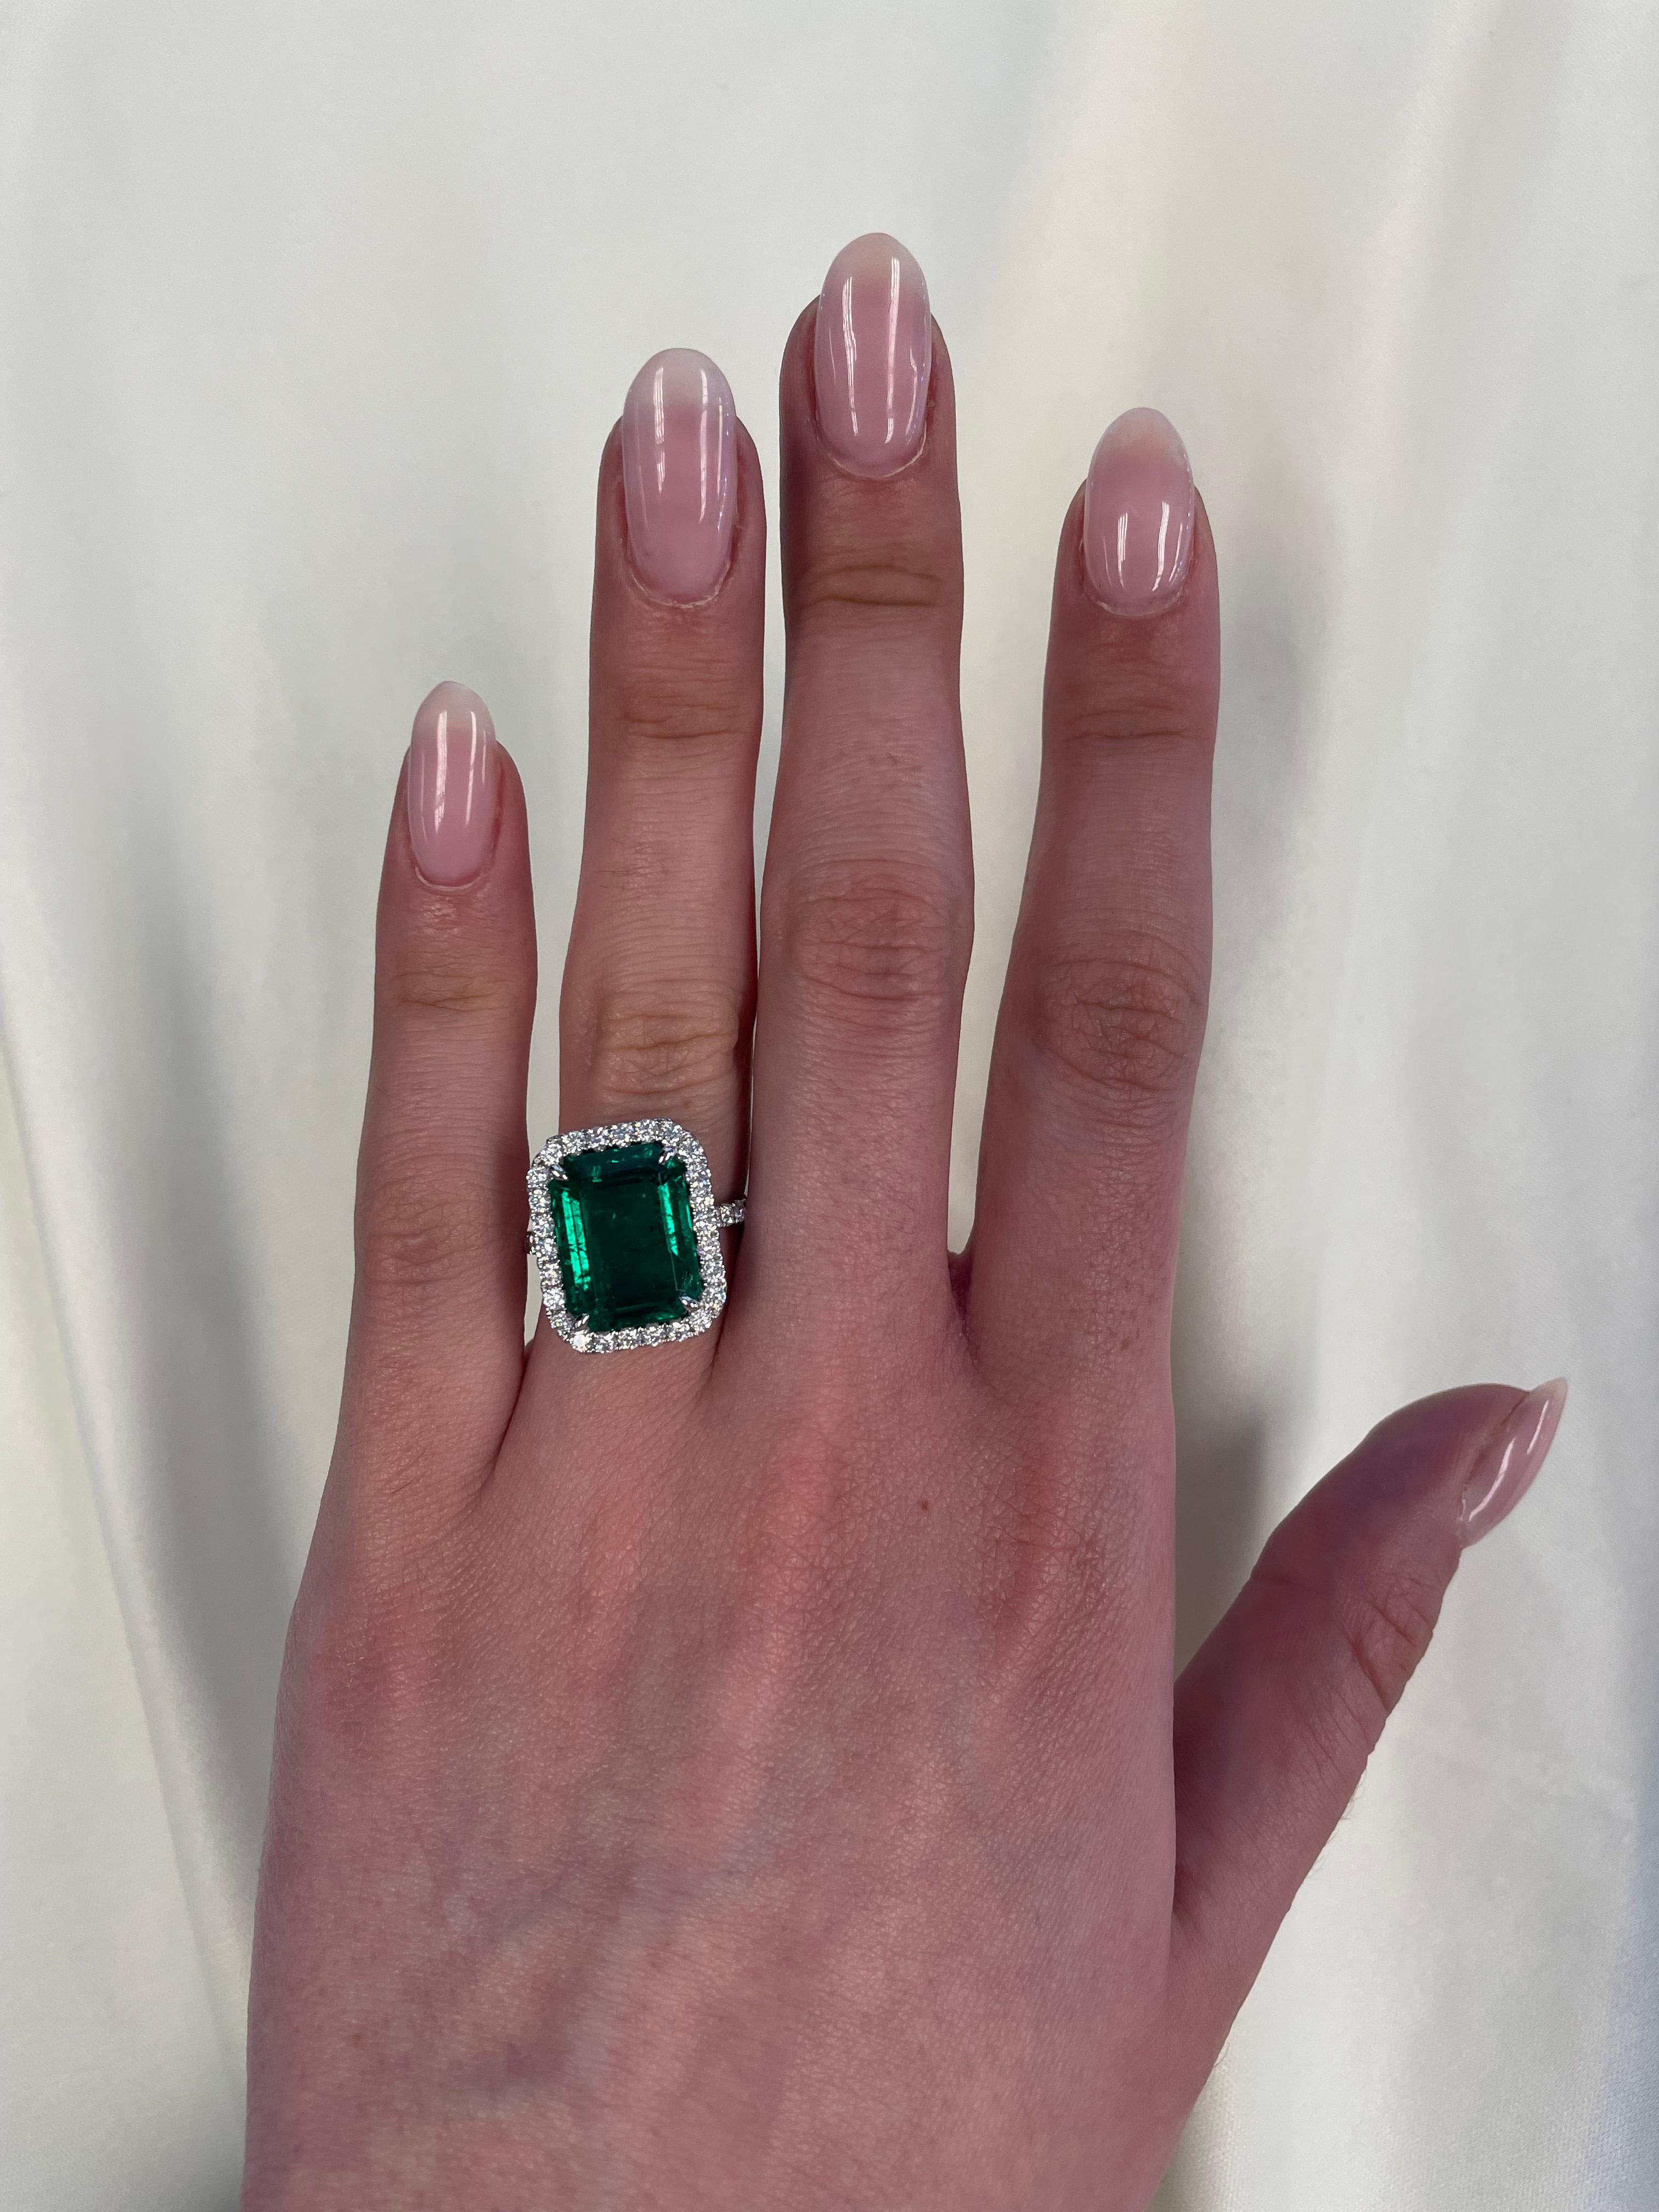 Stunning emerald of superb color with diamond halo ring, GIA certified. High jewelry by Alexander Beverly Hills. 
8.12 carats total gemstone weight.
GIA certified 7.29 carat emerald cut emerald (faces up like a 10ct), F2. 38 round brilliant